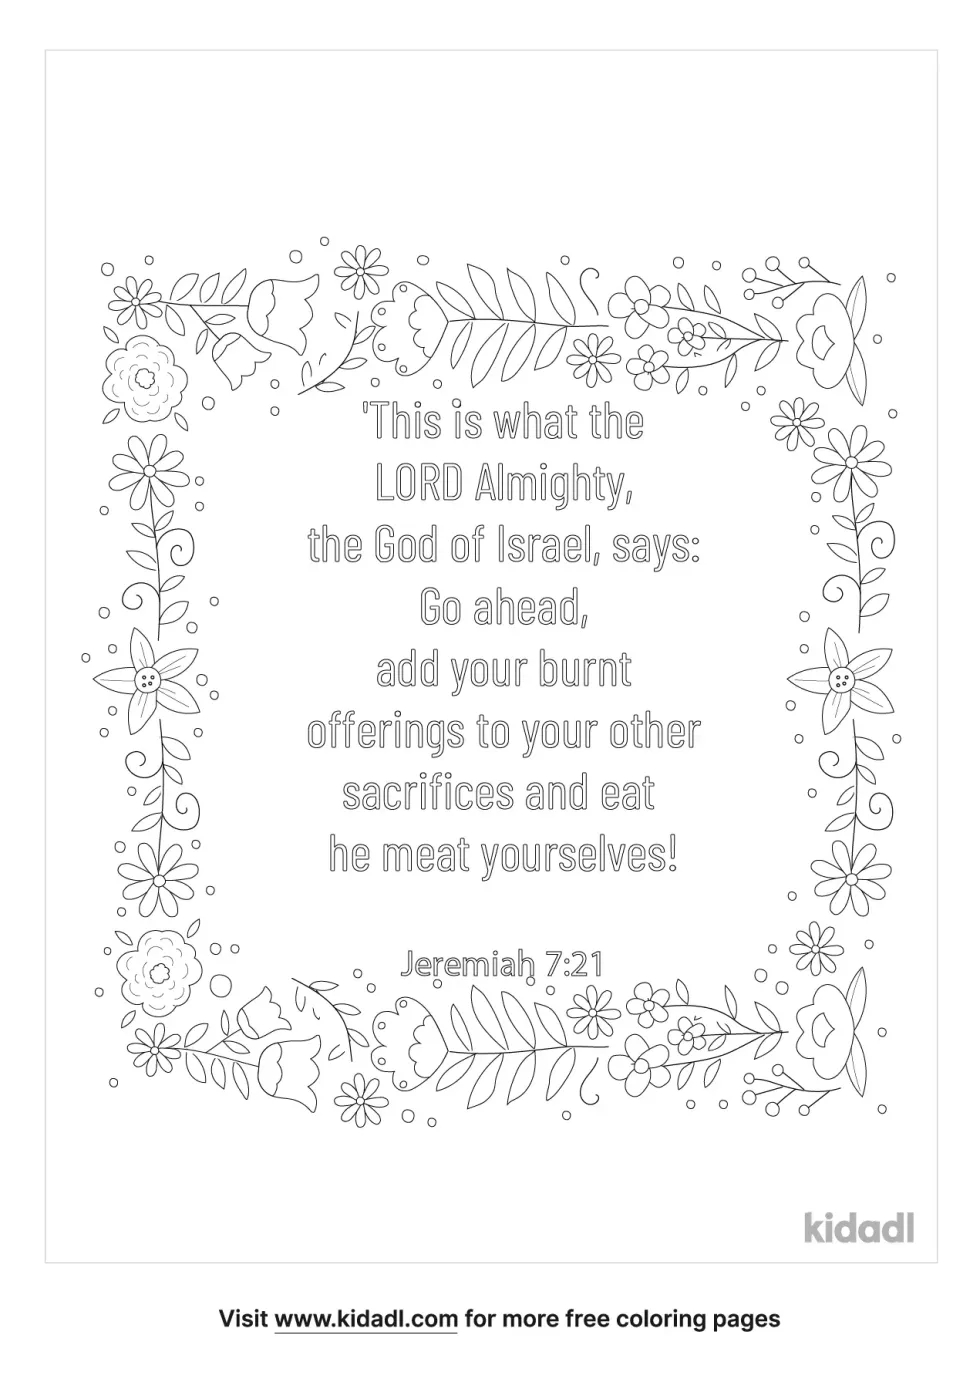 Jeremiah 7:21 Coloring Page